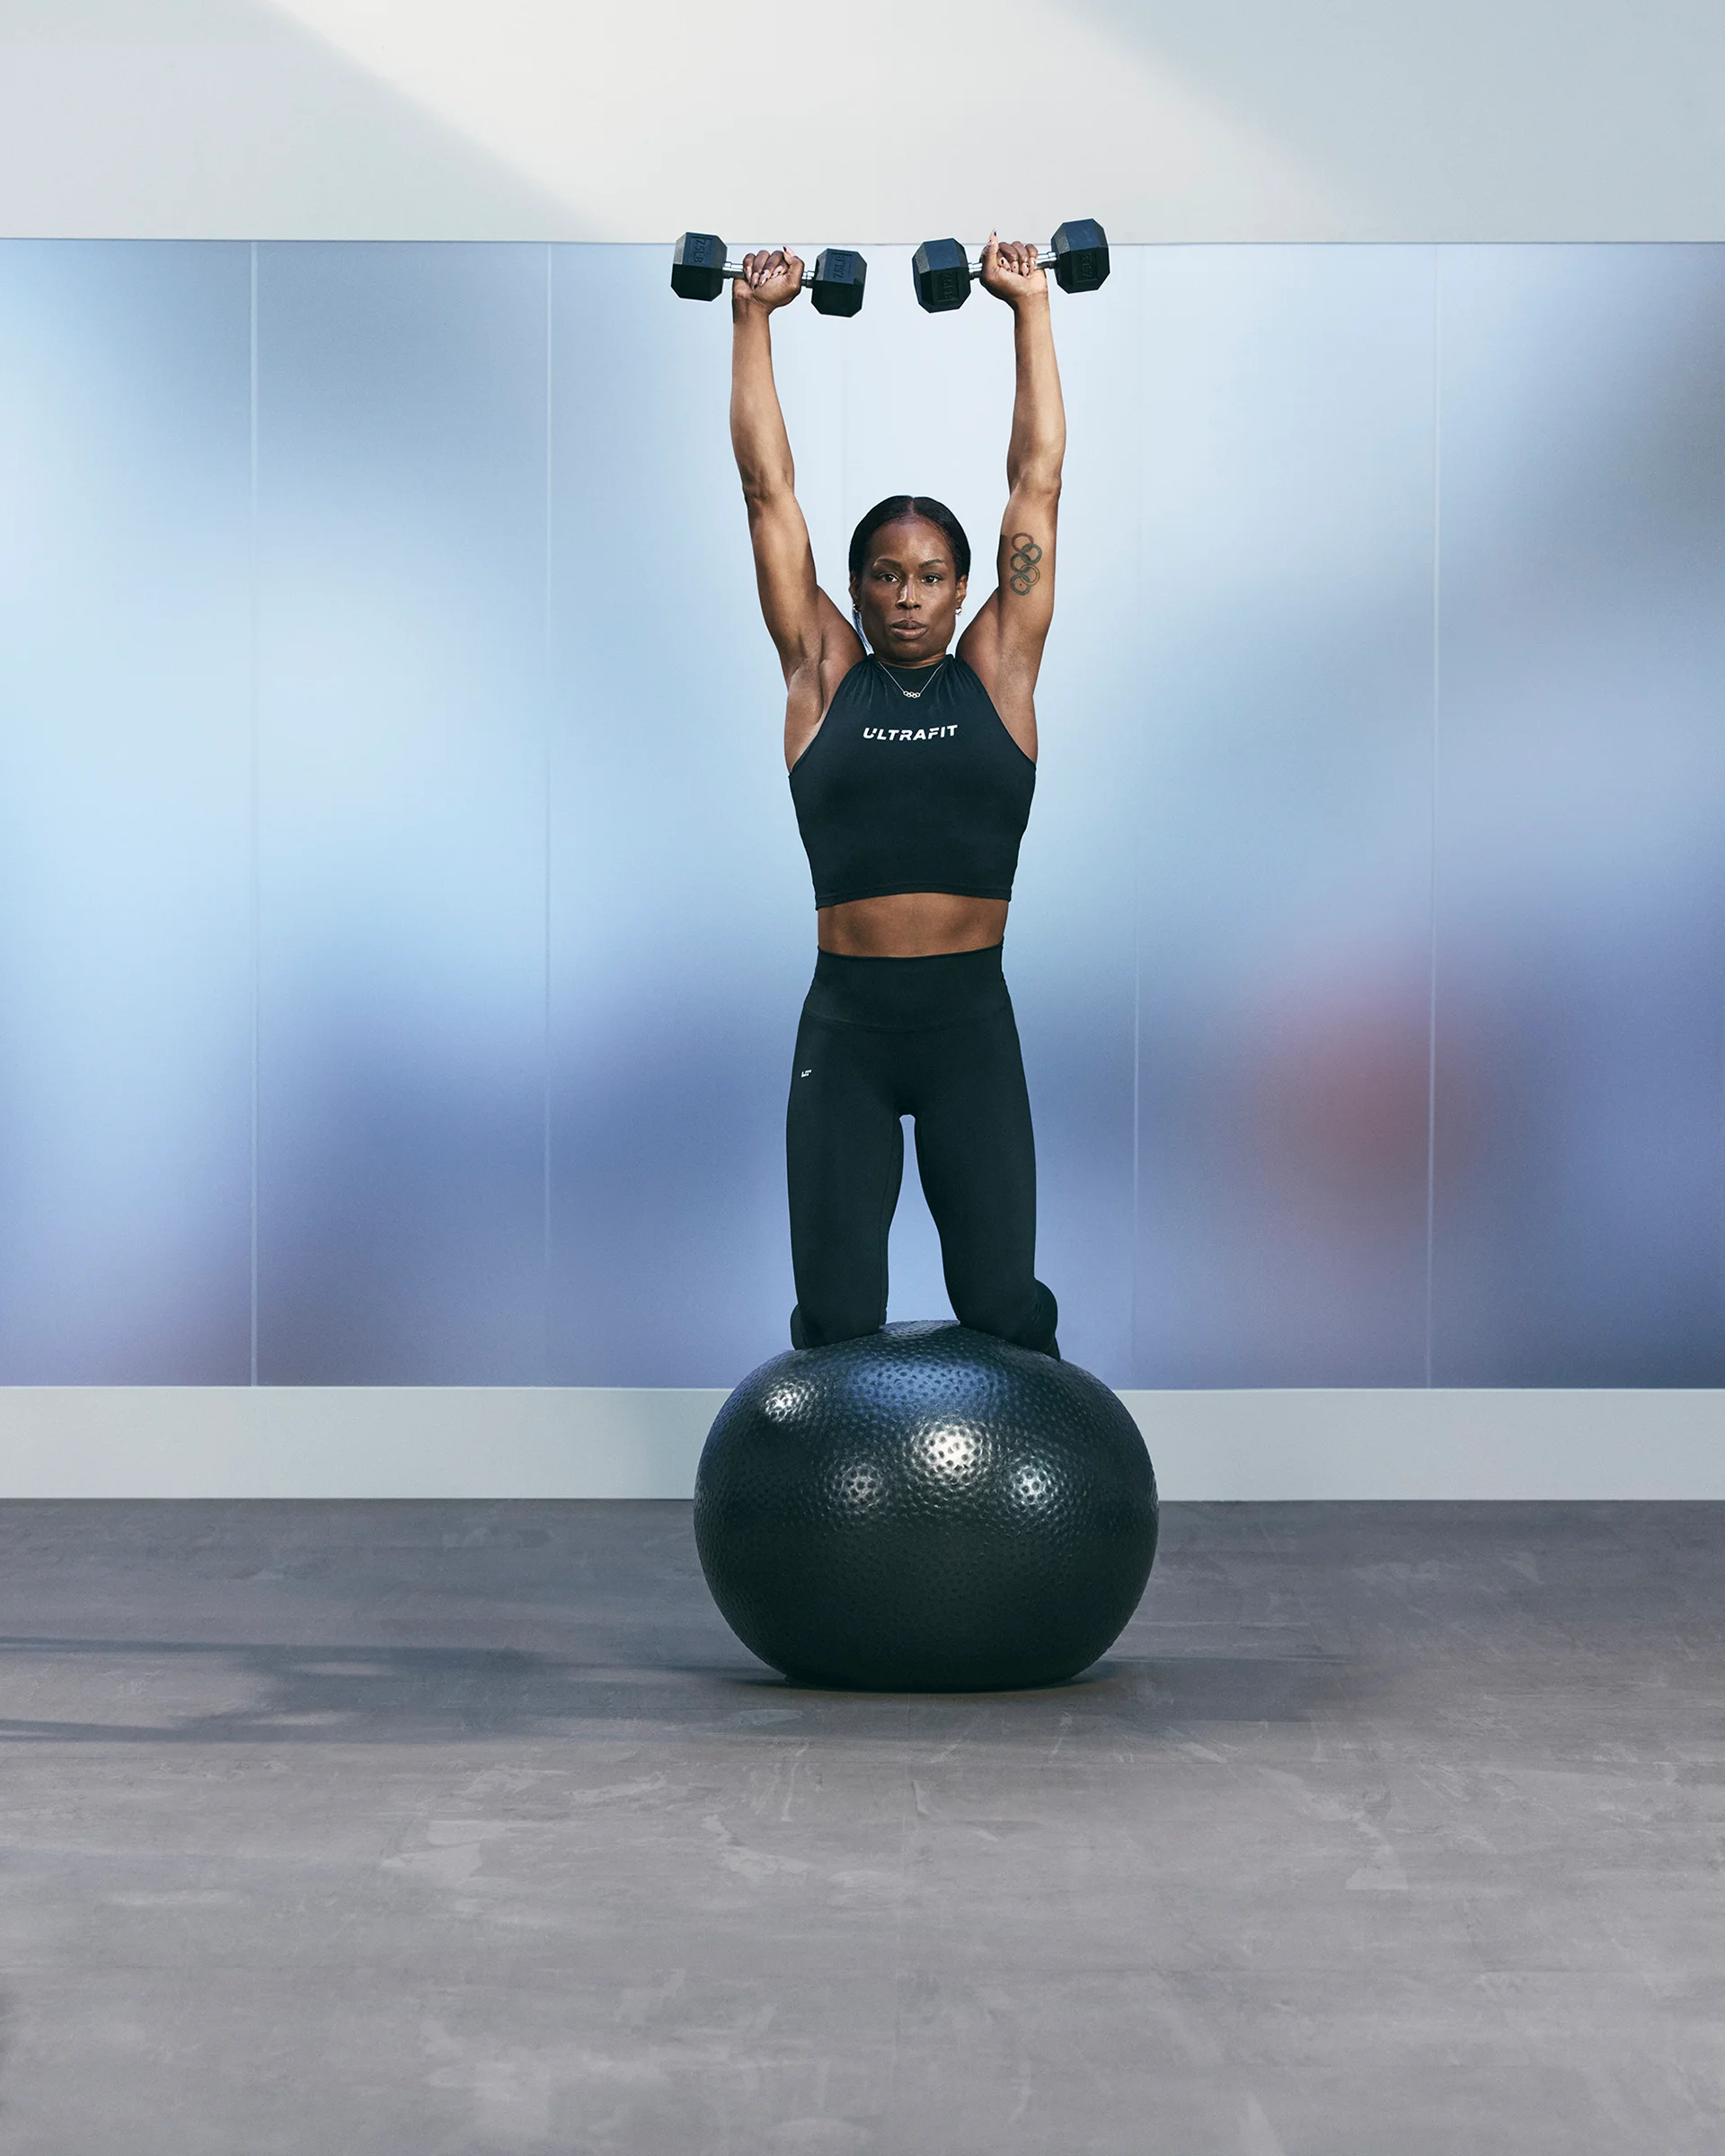 A Life Time member raising dumbbells overhead while kneeling on a stability ball.